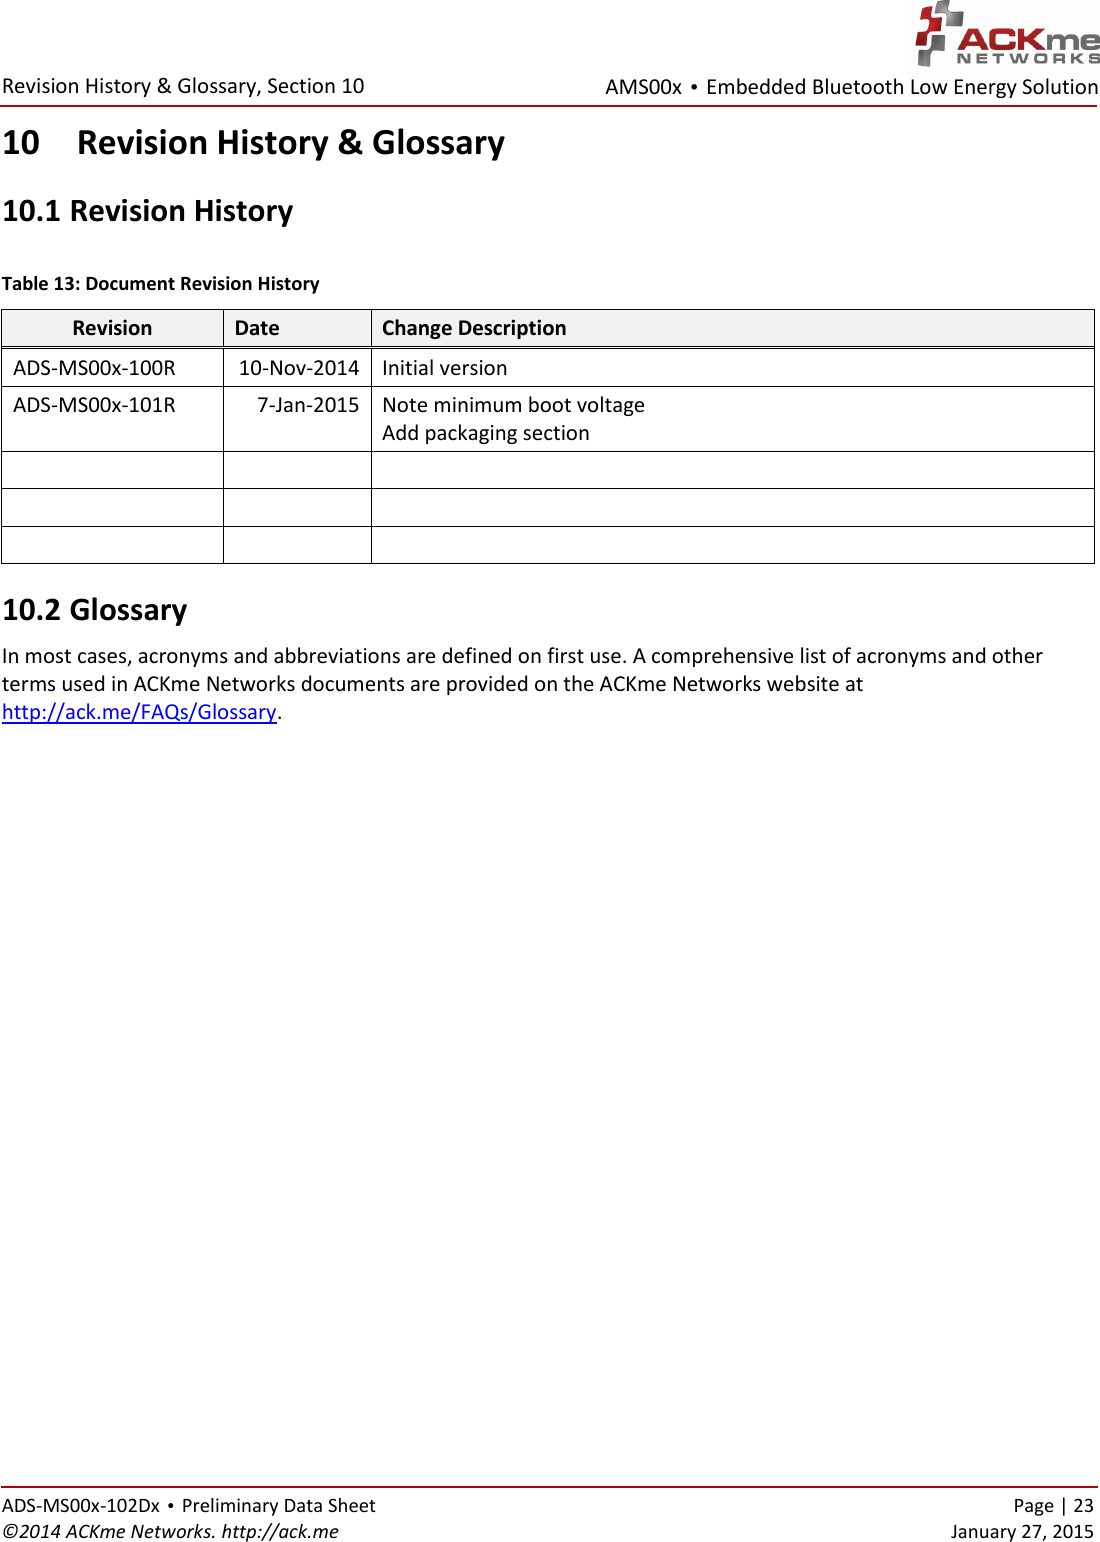 AMS00x • Embedded Bluetooth Low Energy Solution  Revision History &amp; Glossary, Section 10   ADS-MS00x-102Dx • Preliminary Data Sheet    Page | 23 ©2014 ACKme Networks. http://ack.me    January 27, 2015 10 Revision History &amp; Glossary 10.1  Revision History  Table 13: Document Revision History Revision Date Change Description ADS-MS00x-100R 10-Nov-2014 Initial version  ADS-MS00x-101R 7-Jan-2015 Note minimum boot voltage Add packaging section          10.2  Glossary In most cases, acronyms and abbreviations are defined on first use. A comprehensive list of acronyms and other terms used in ACKme Networks documents are provided on the ACKme Networks website at http://ack.me/FAQs/Glossary.                